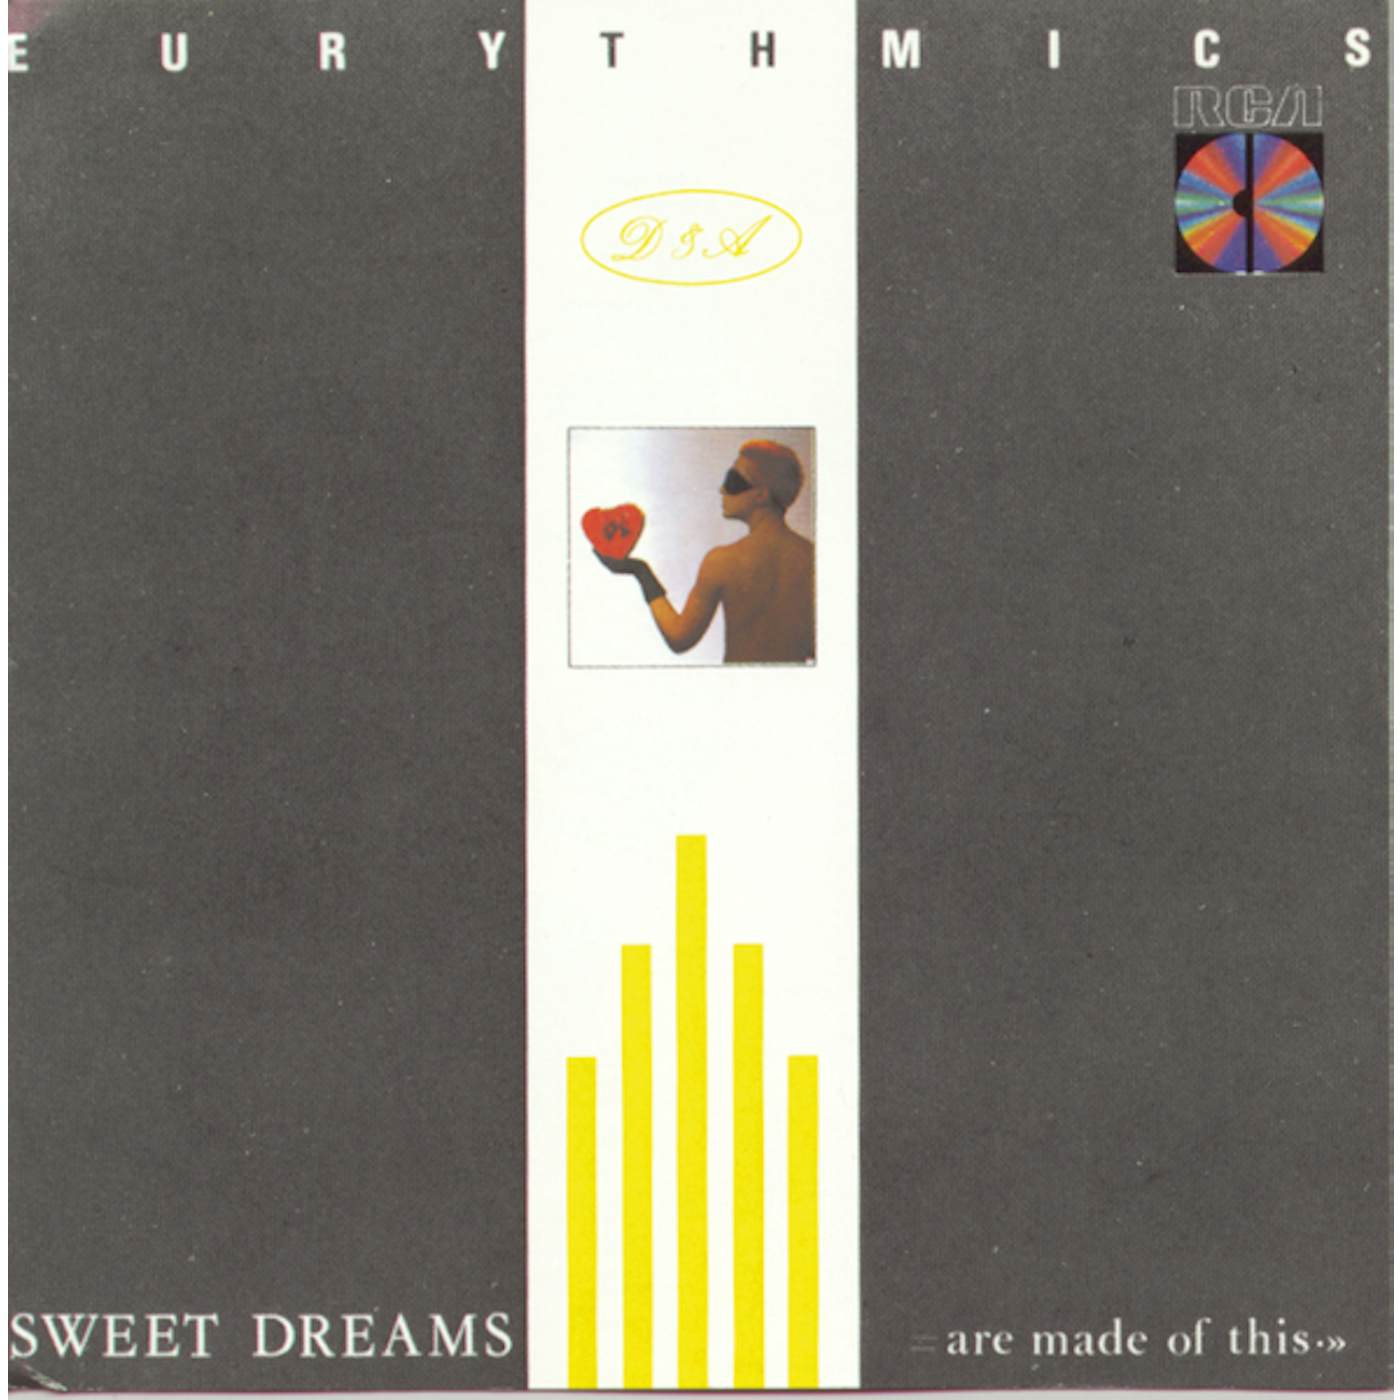 Eurythmics SWEET DREAMS (ARE MADE OF THIS) CD